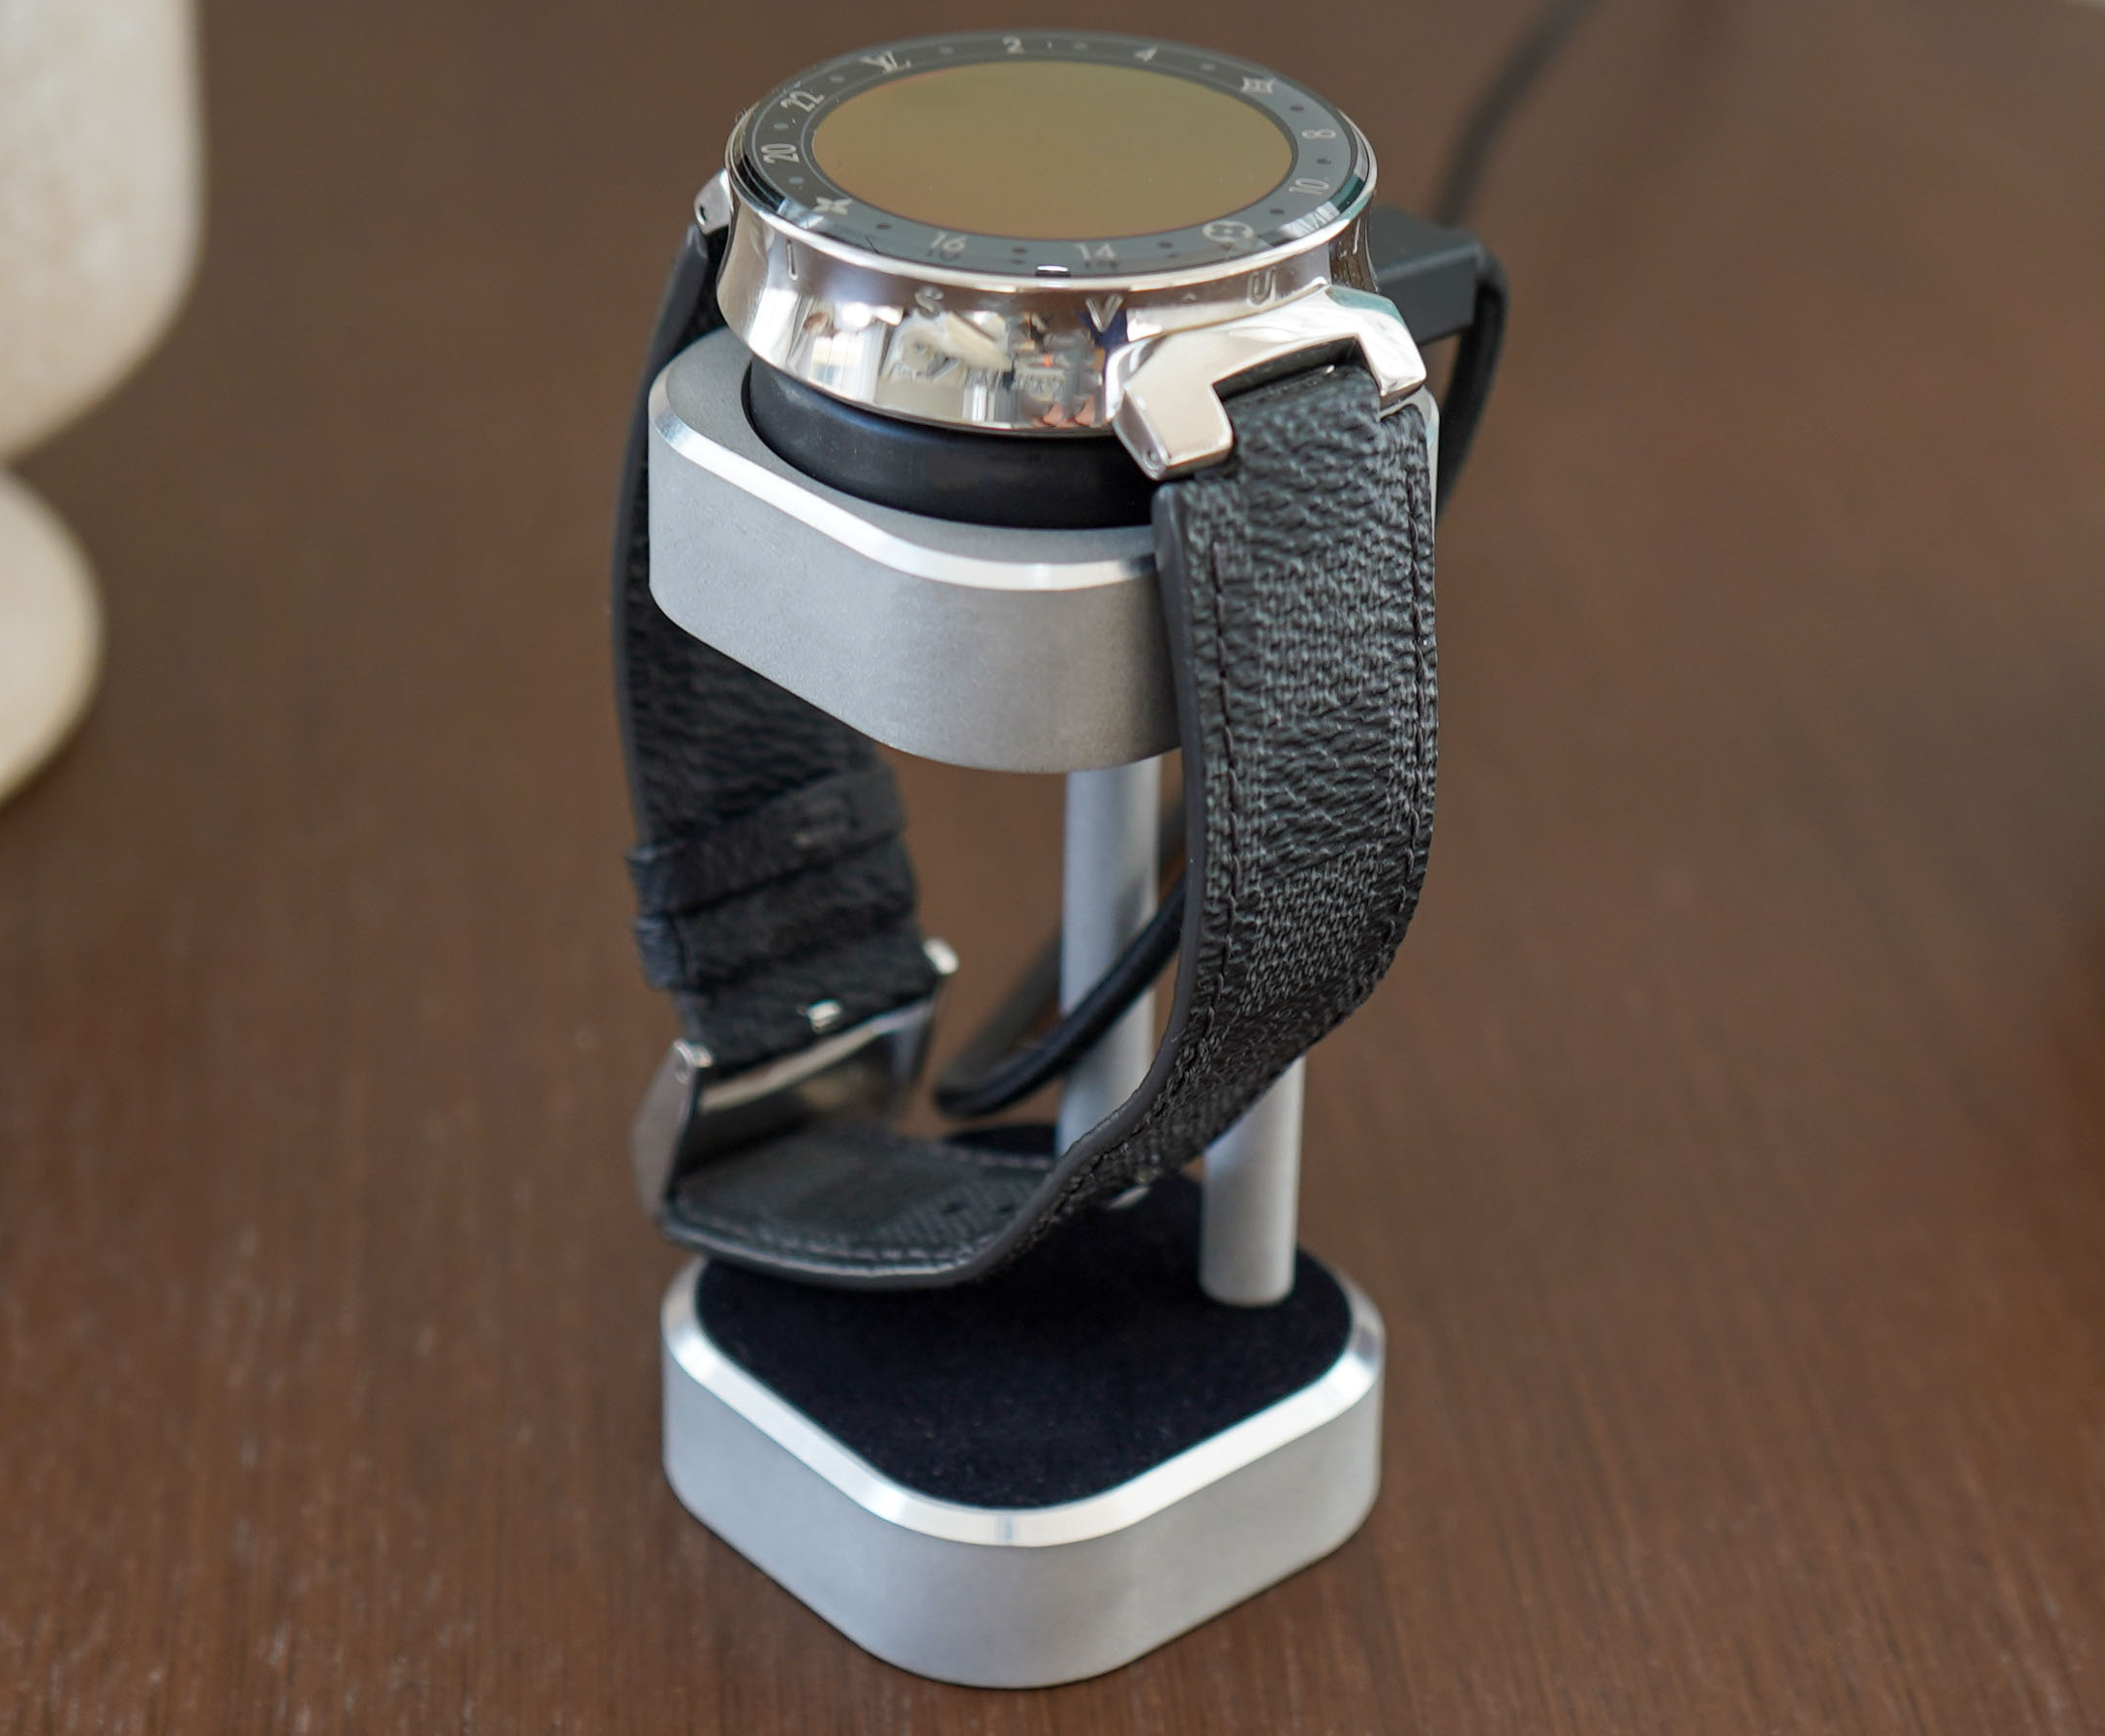 Charger For Tambour Horizon Light Up Connected Watches - Art of